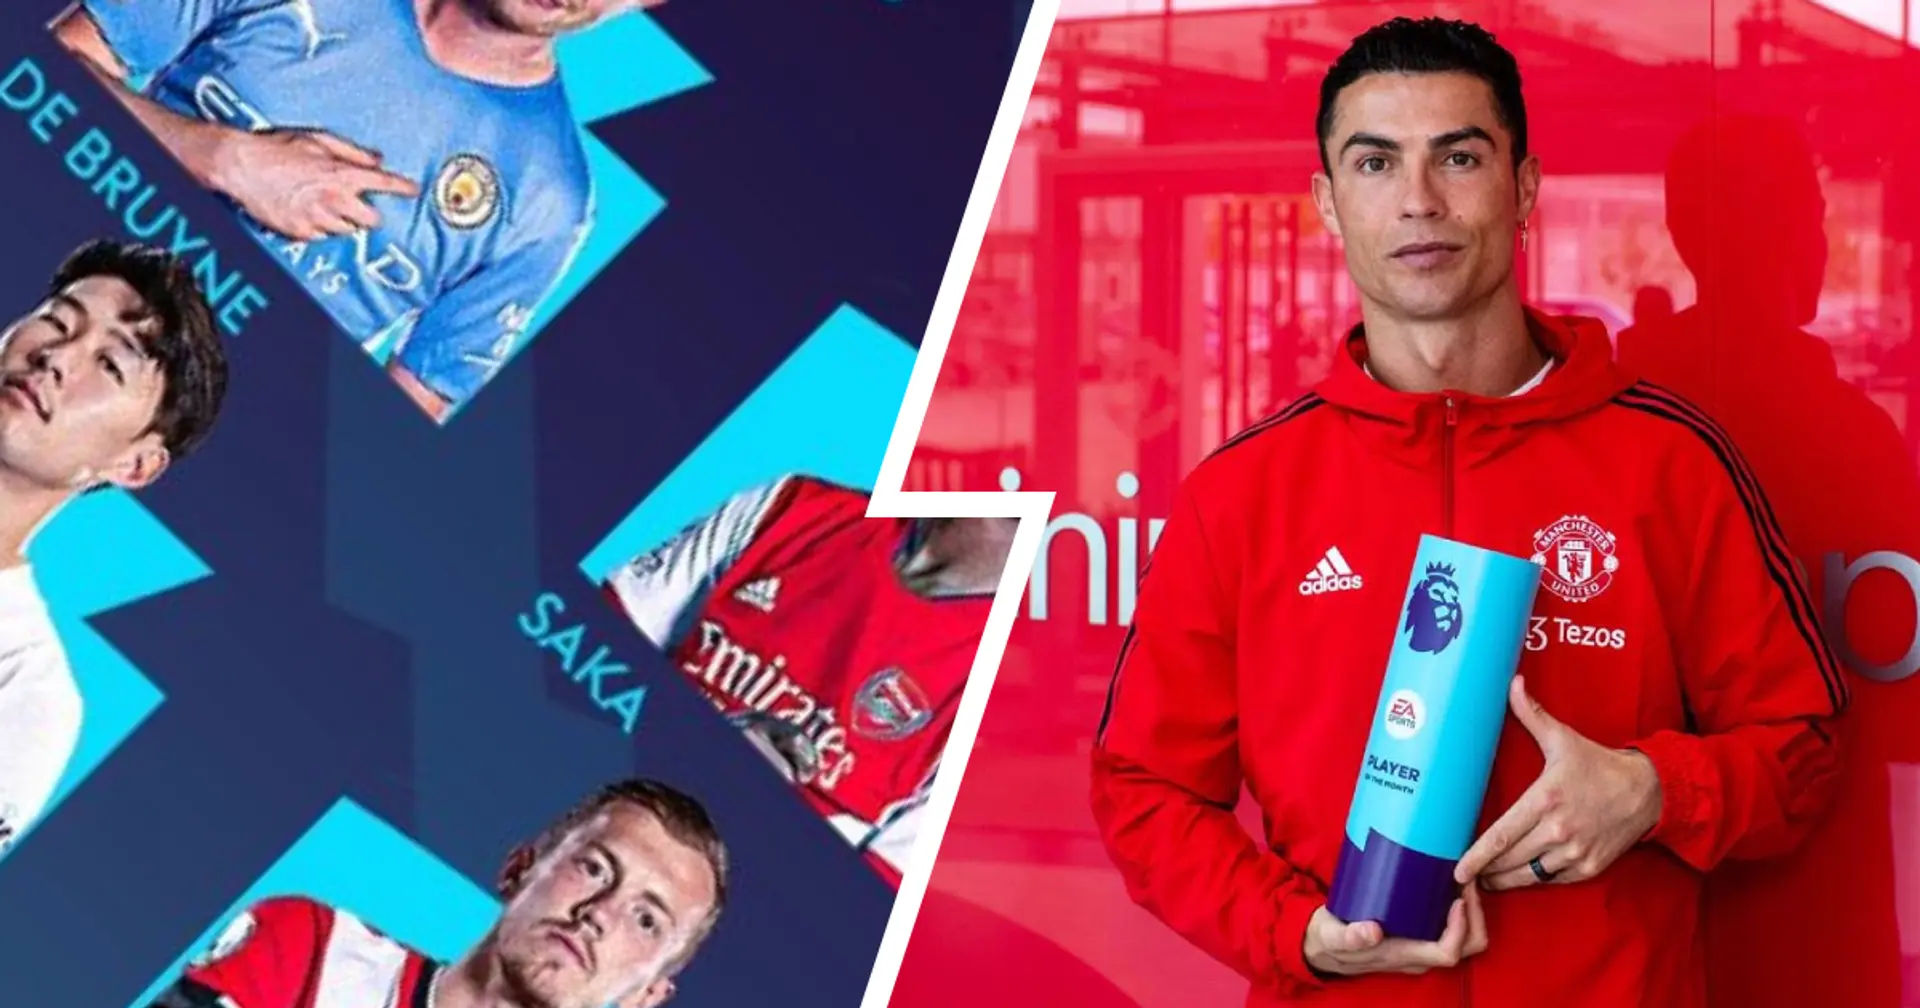 Cristiano Ronaldo snubbed from Premier League Player of the Year nomination